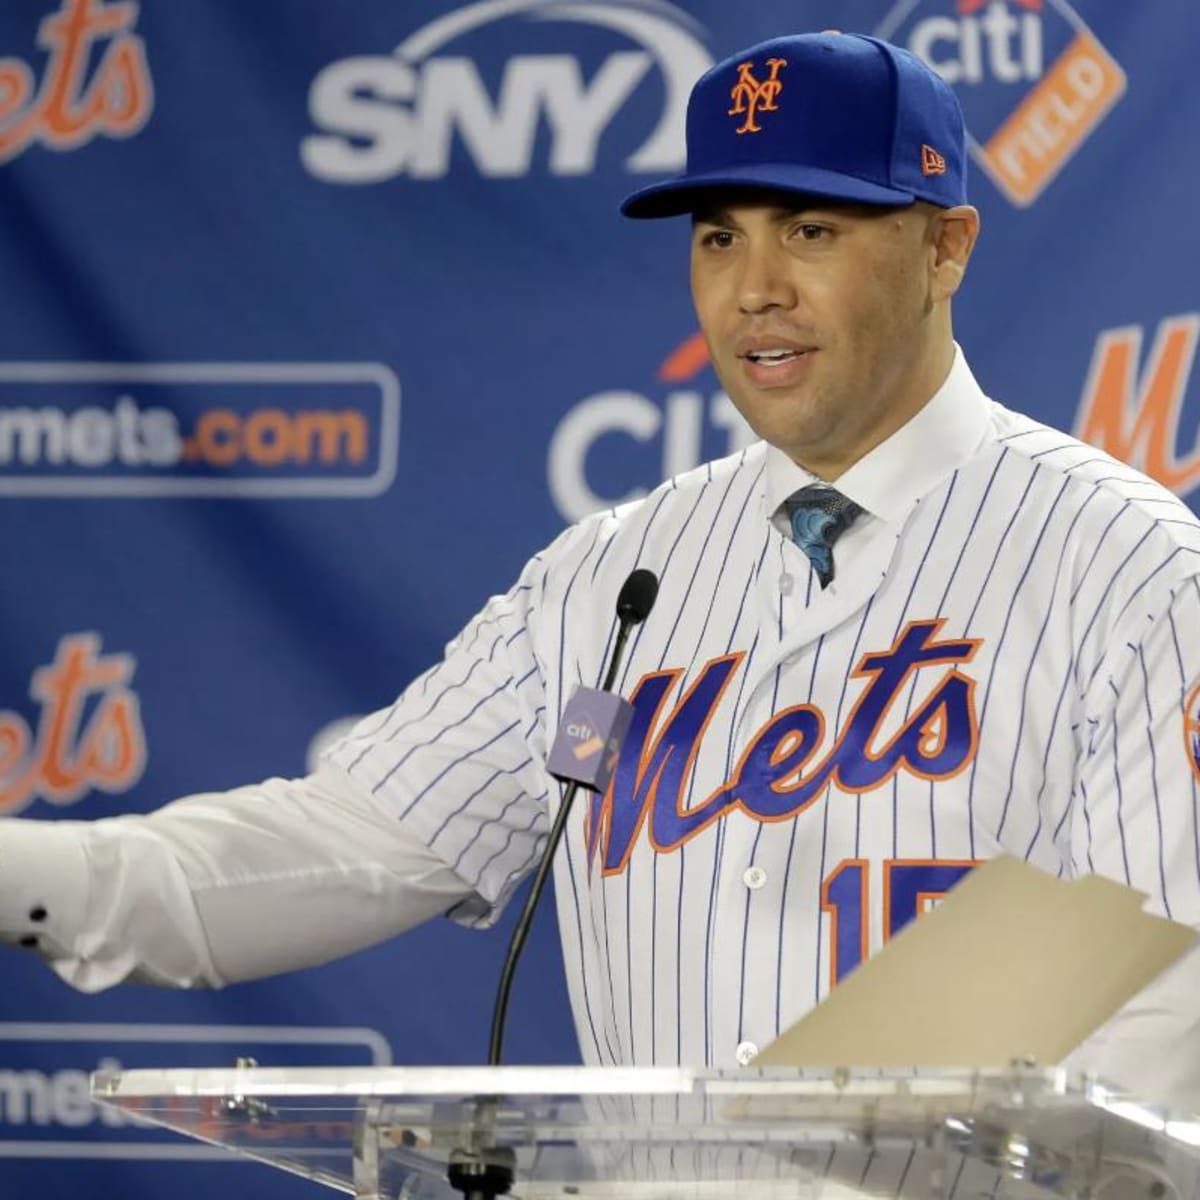 Mets hire Carlos Beltrán for front office role three years after